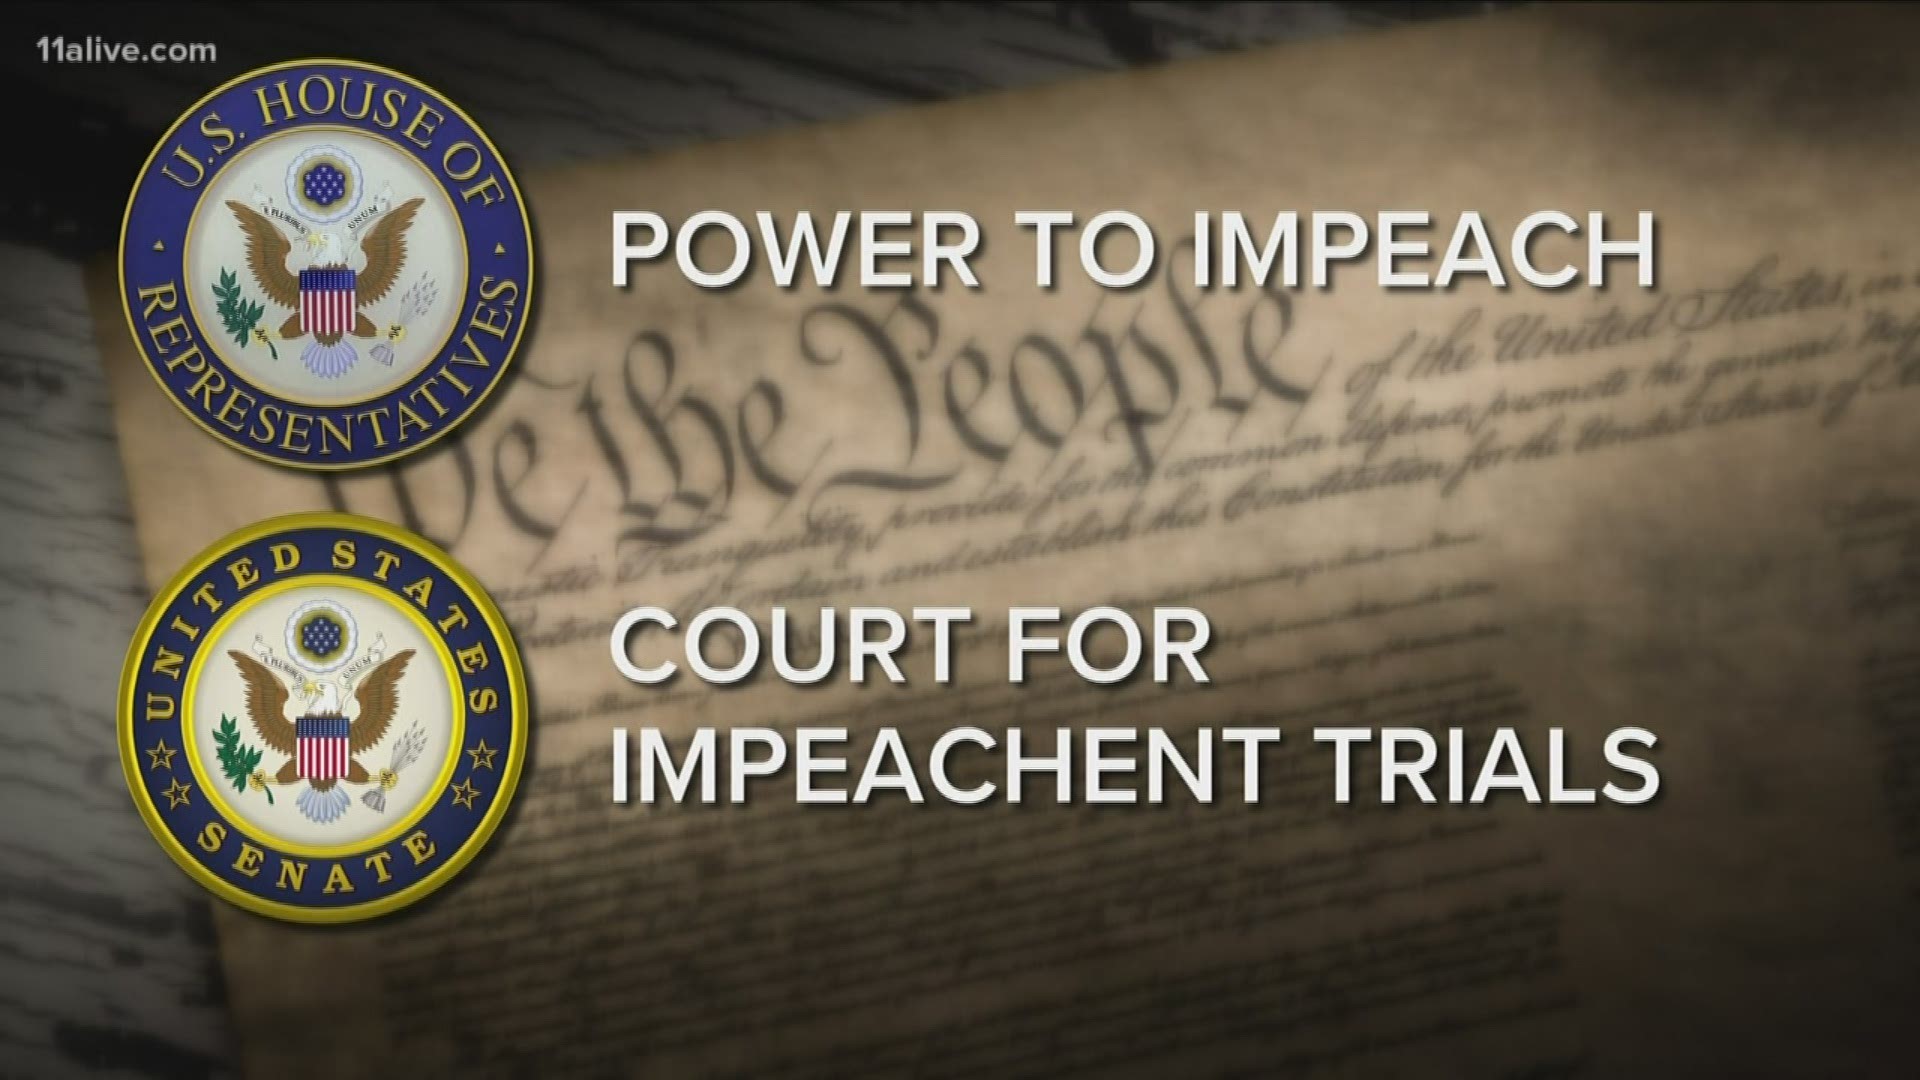 Only two presidents have been impeached in American history and a third was nearly impeached.